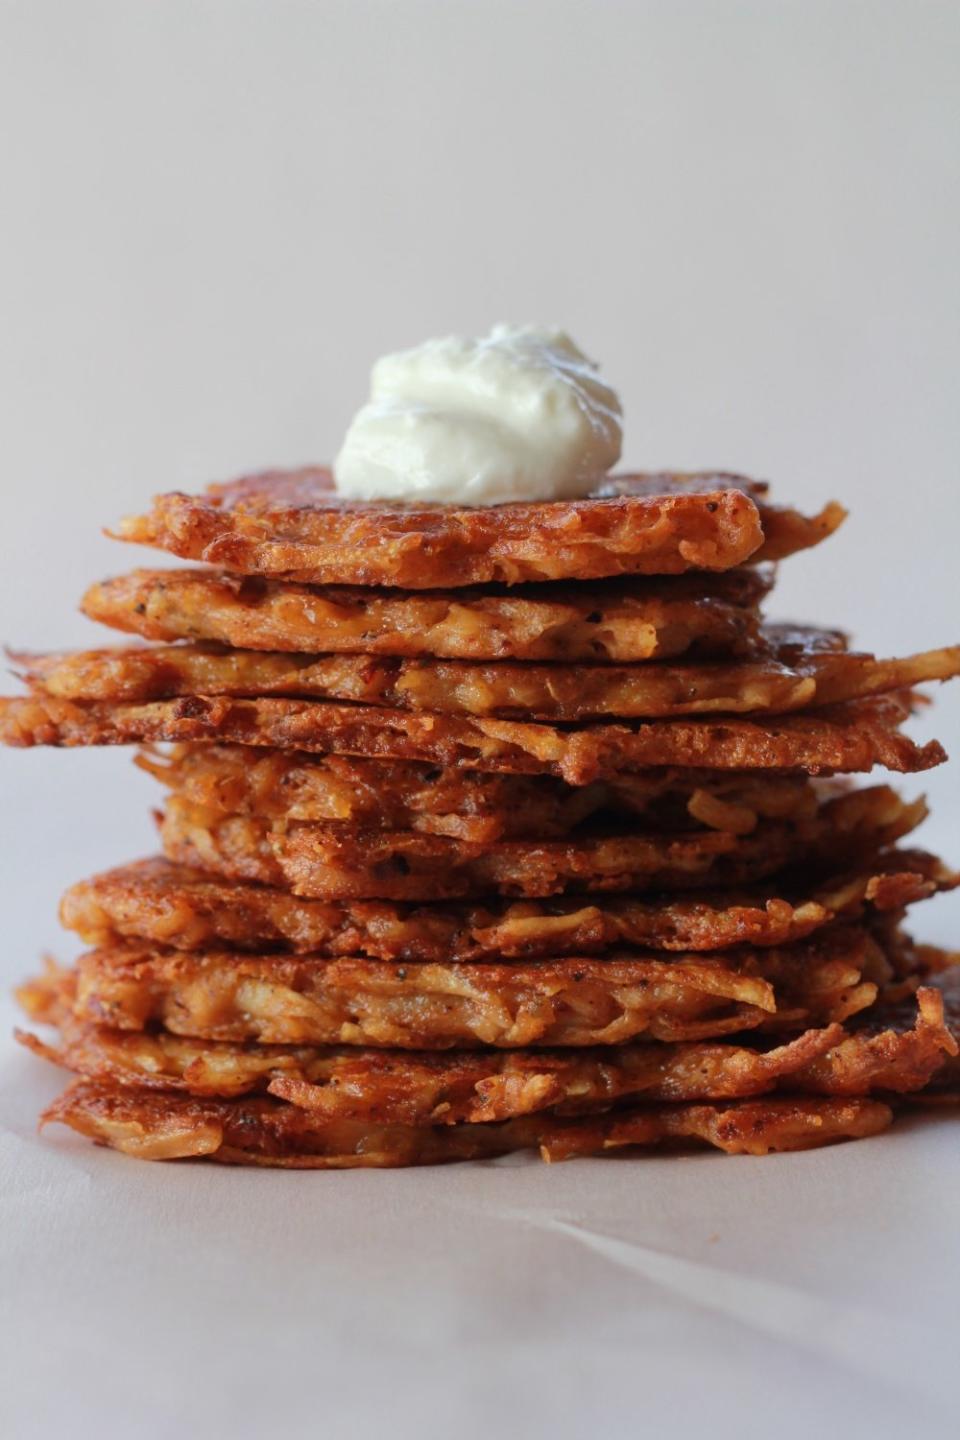 <strong>Get the <a href="http://www.halfbakedharvest.com/chipotle-cheddar-potato-latkes/">Cheddar Chipotle Potato Latkes recipe</a>&nbsp;from Half Baked Harvest</strong>